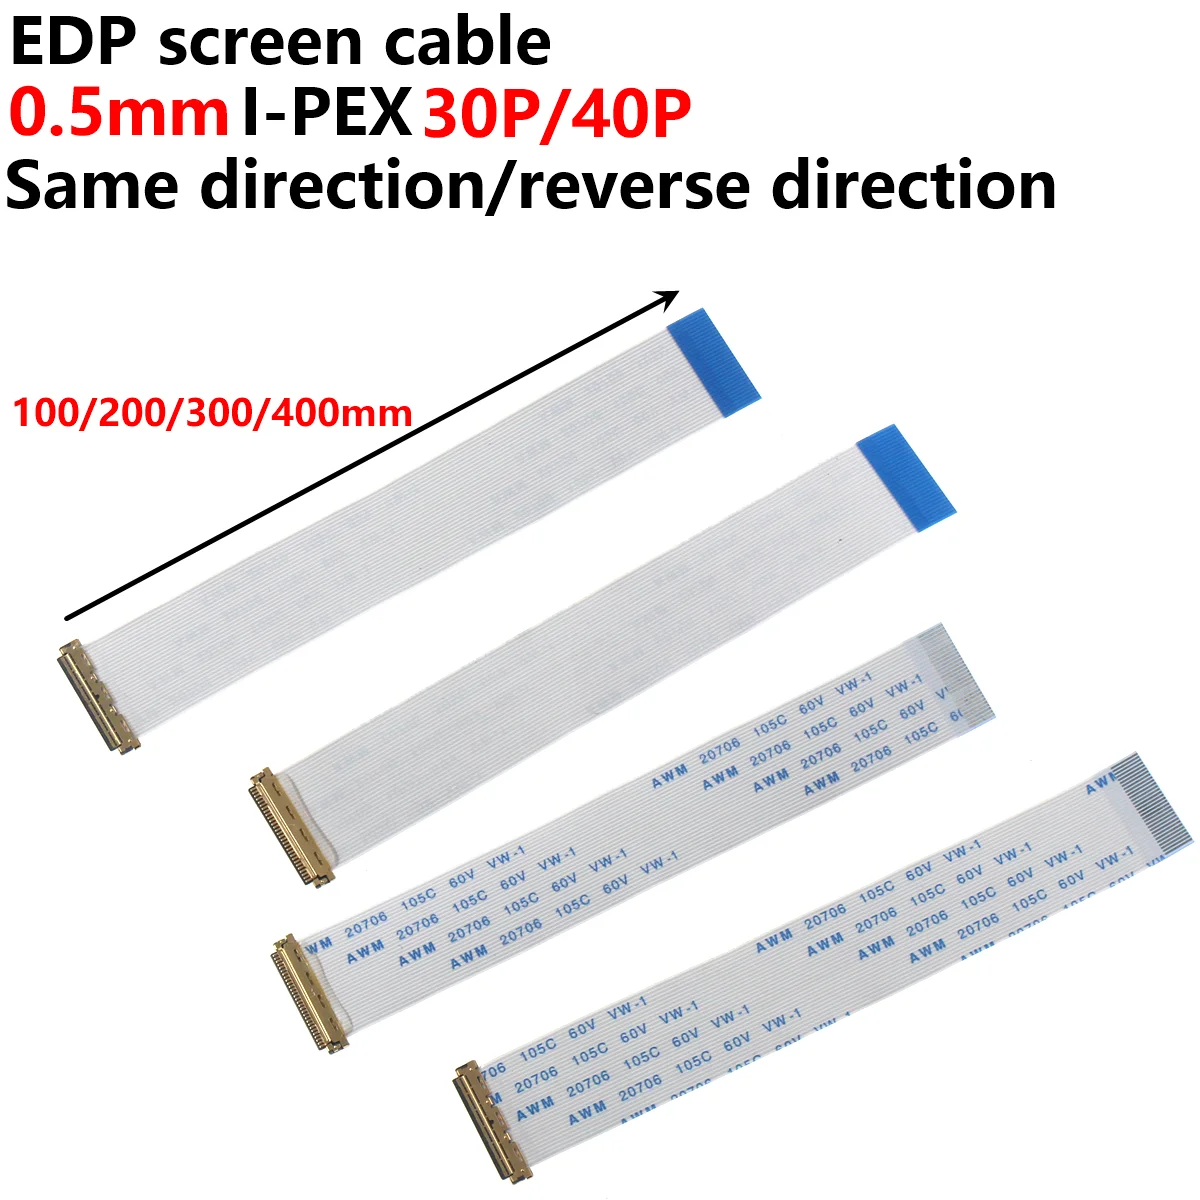 5pcs EDP screen cable 0.5MM I-PEX 20453 30P/40P FFC flexible cable with I-PEX base same direction/reverse direction